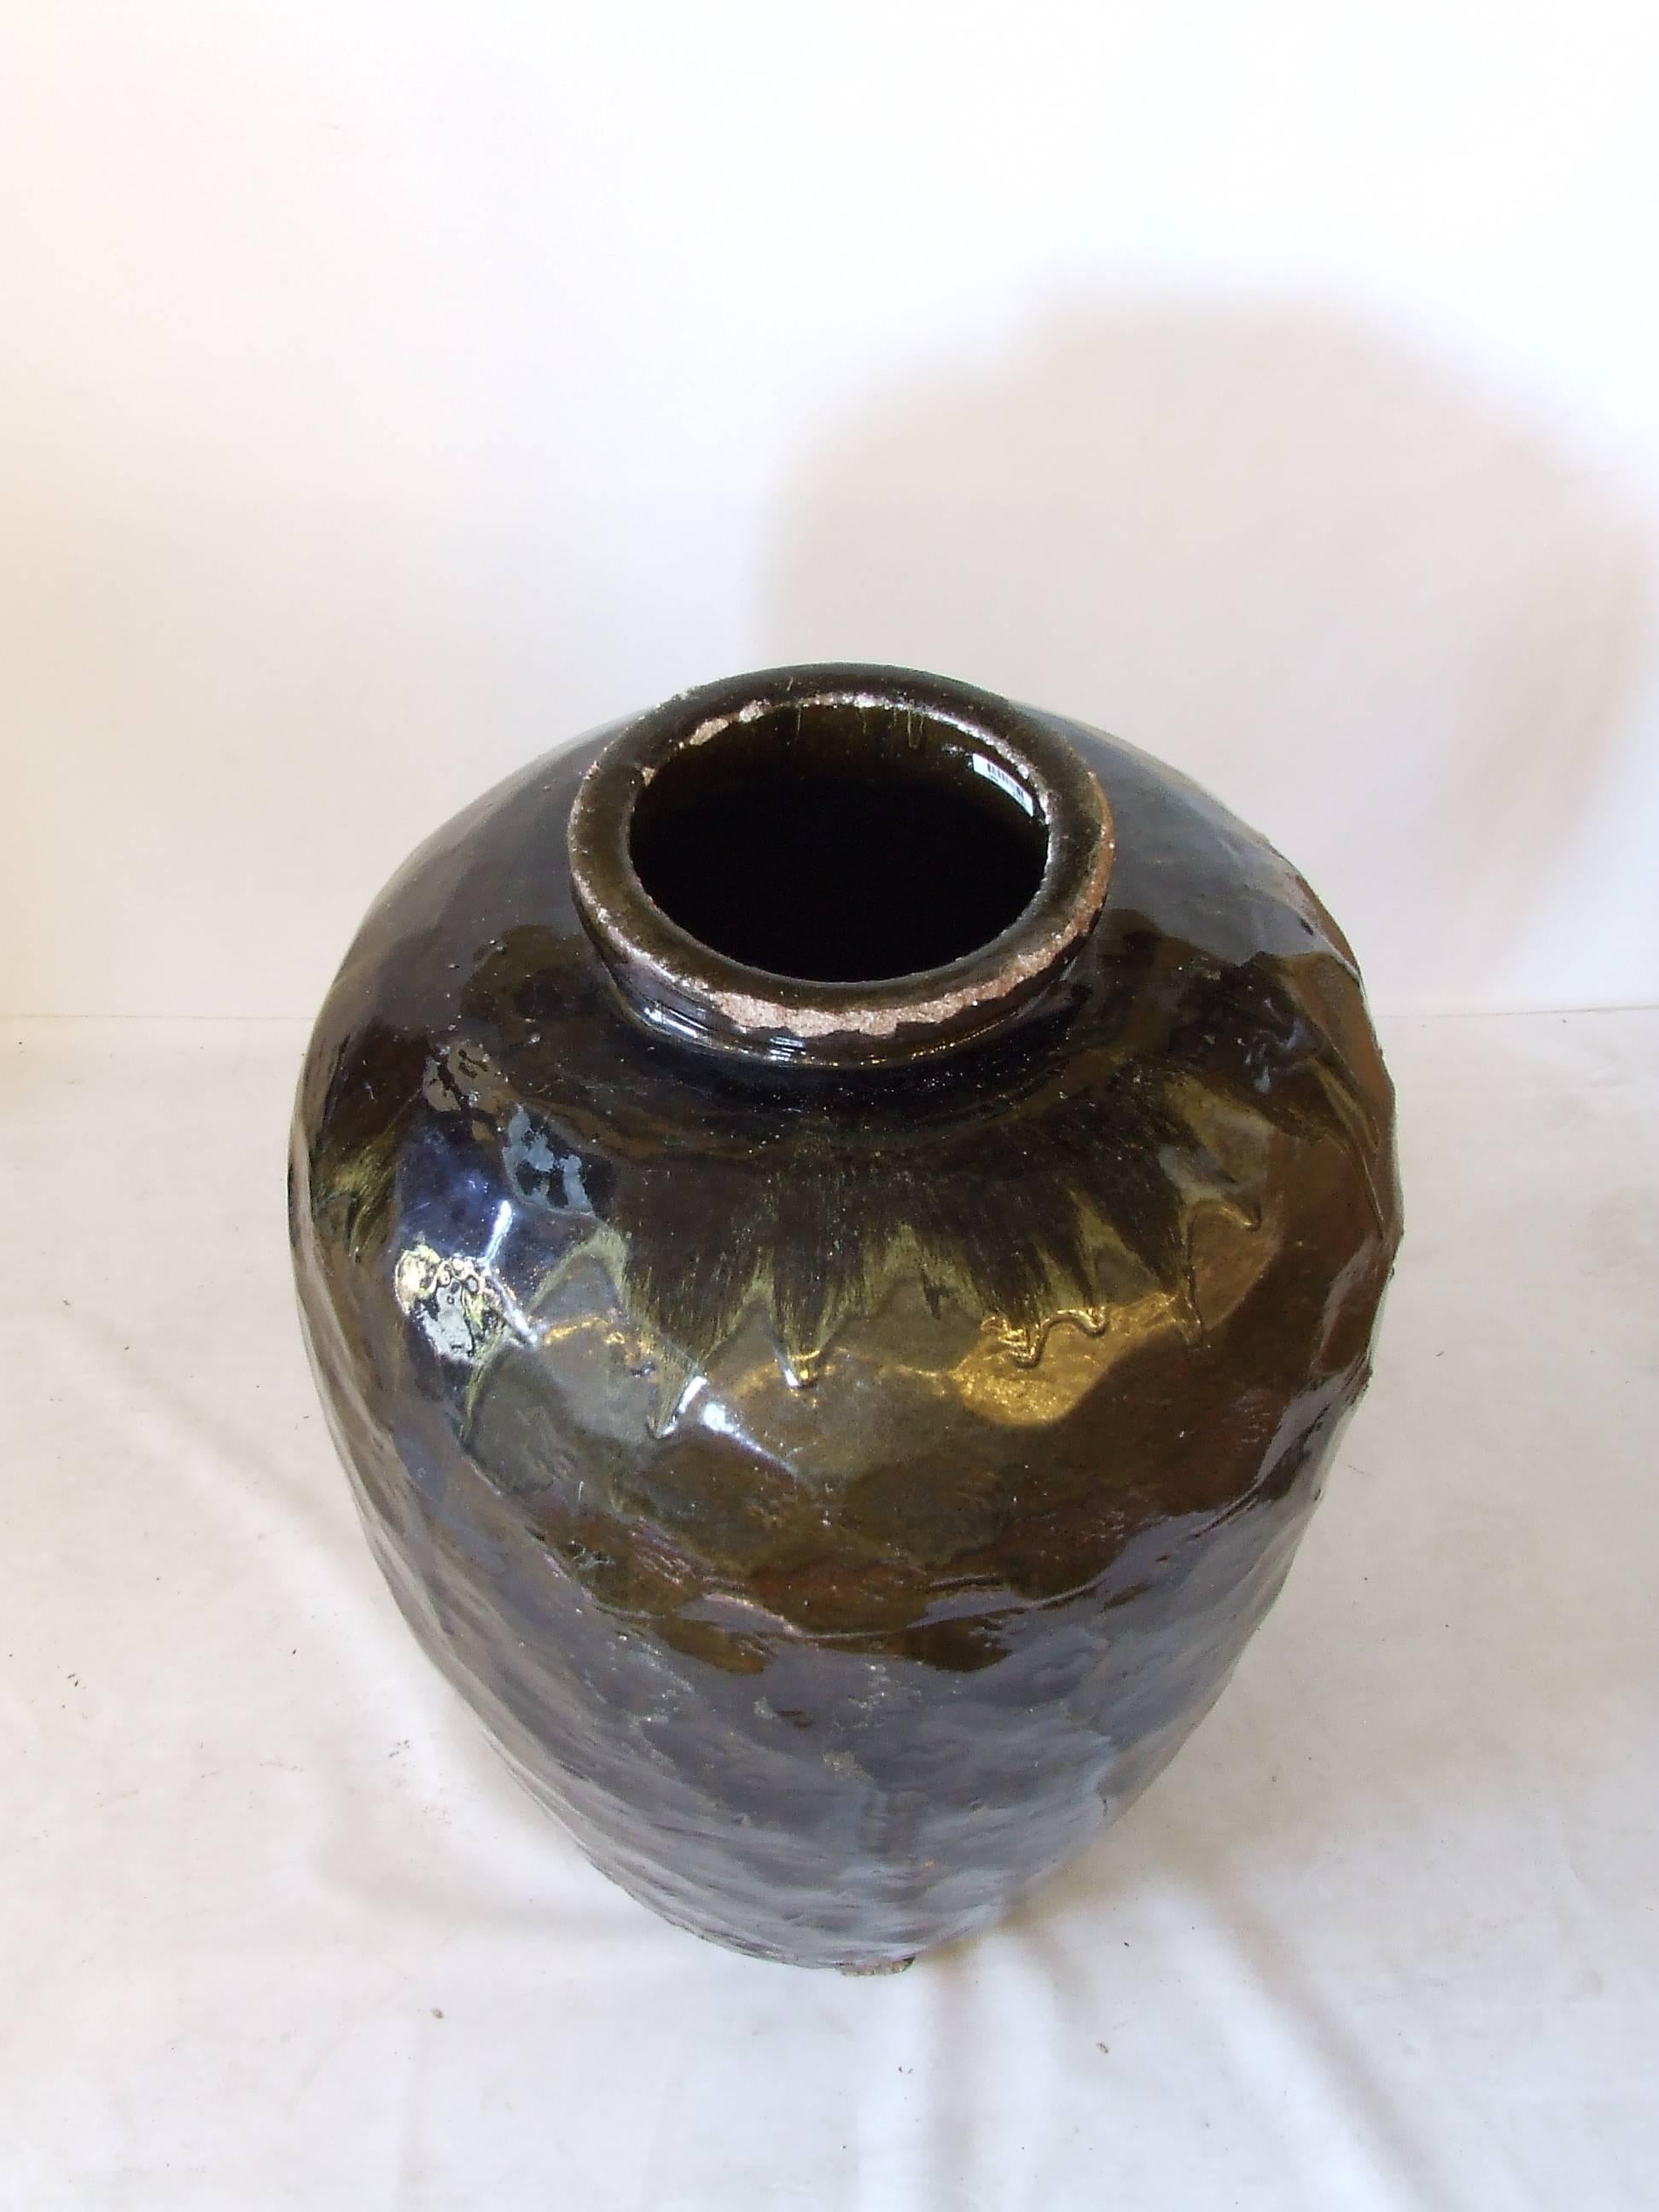 Extra large antique Chinese stoneware pot from western China. The large Asian Pot has beautiful original glaze and finish with minimal age appropriate wear. Originally used to store water for a home. Perfect for an entry or solarium.